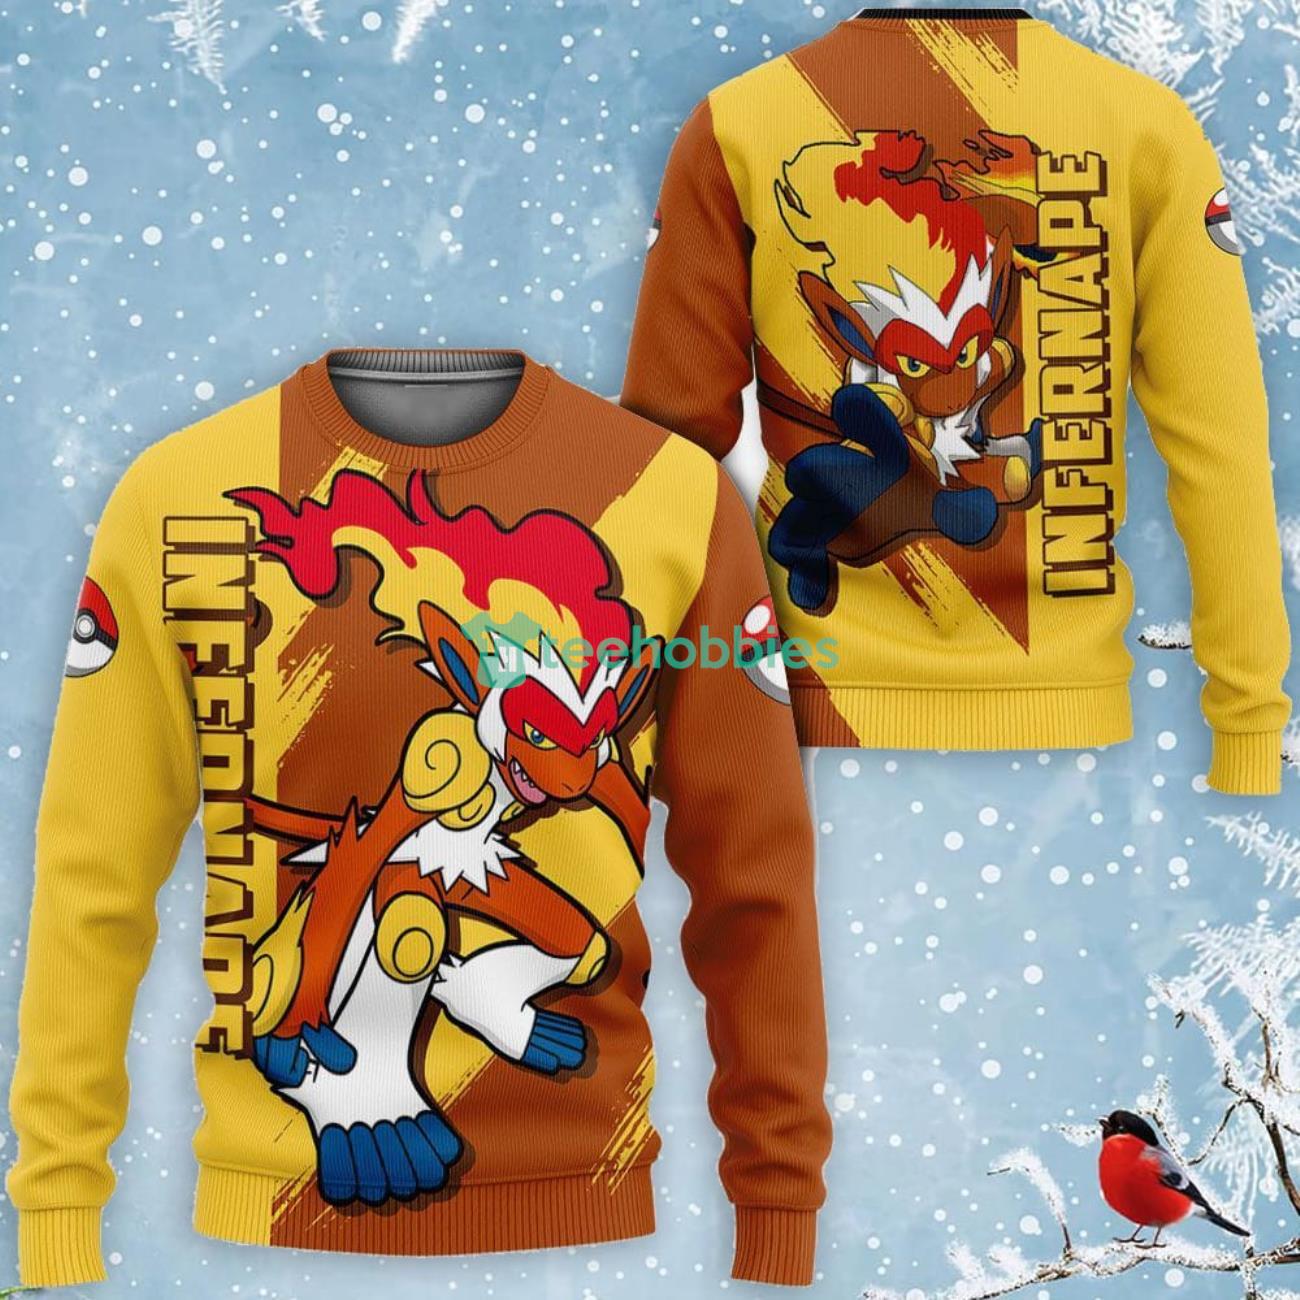 Pokemon Infernape Lover All Over Printed 3D Shirt Anime Fans Product Photo 2 Product photo 2